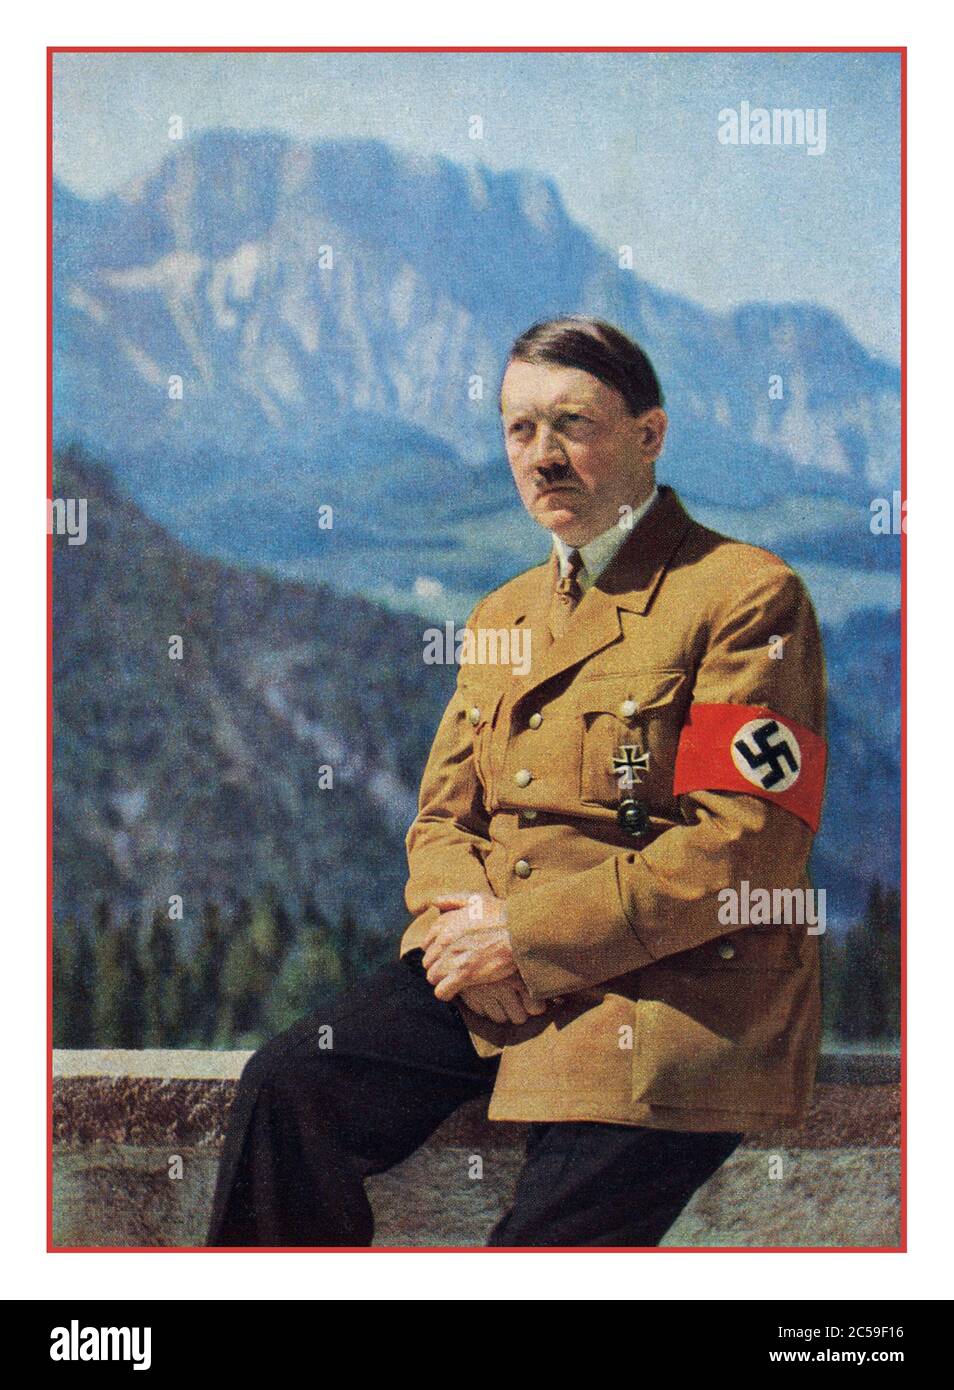 1940's Adolf Hitler informal portrait in uniform with swastika armband photographed outdoors with mountain backdrop, by his personal photographer Heinrich Hoffmann at his mountain retreat The Berghof near Berchtesgaden Obersalzberg Bavaria Germany Stock Photo